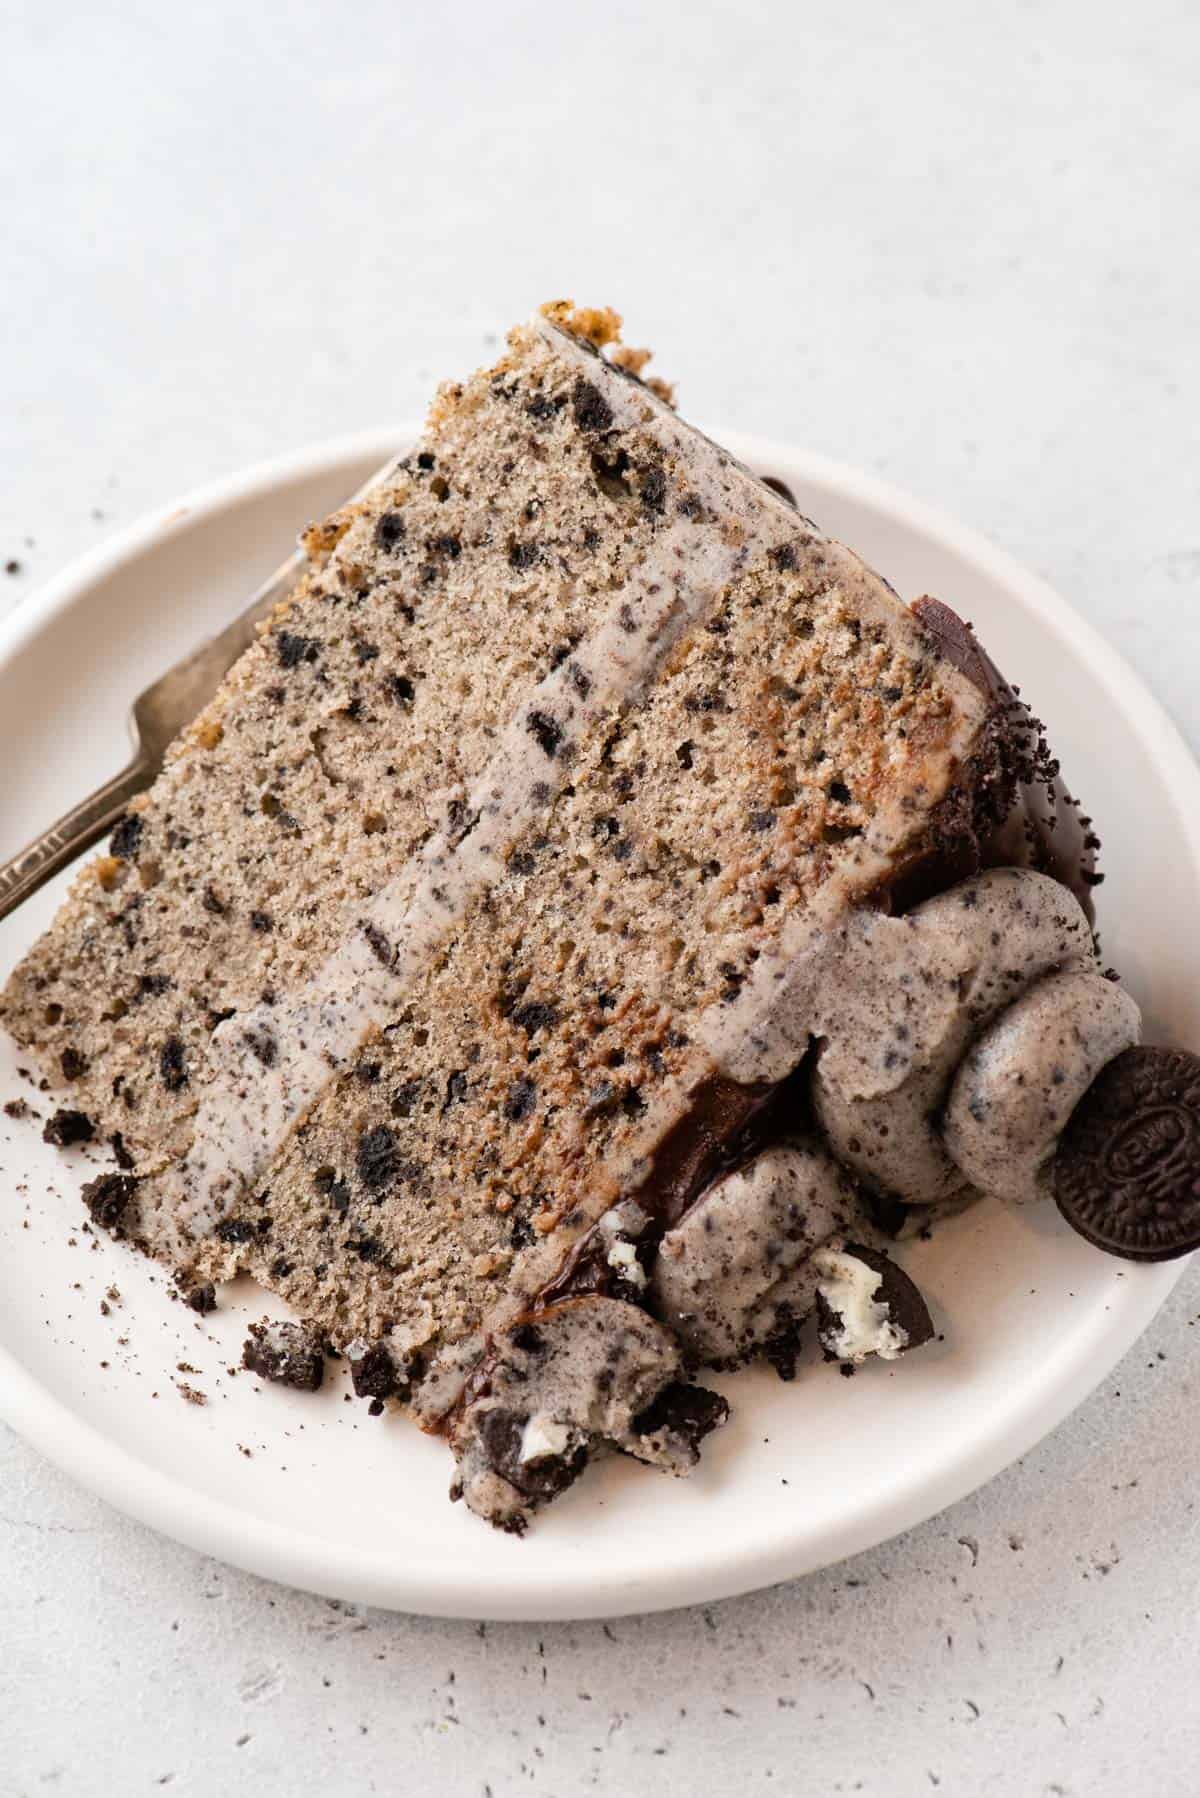 Slice of cake with Oreo frosting